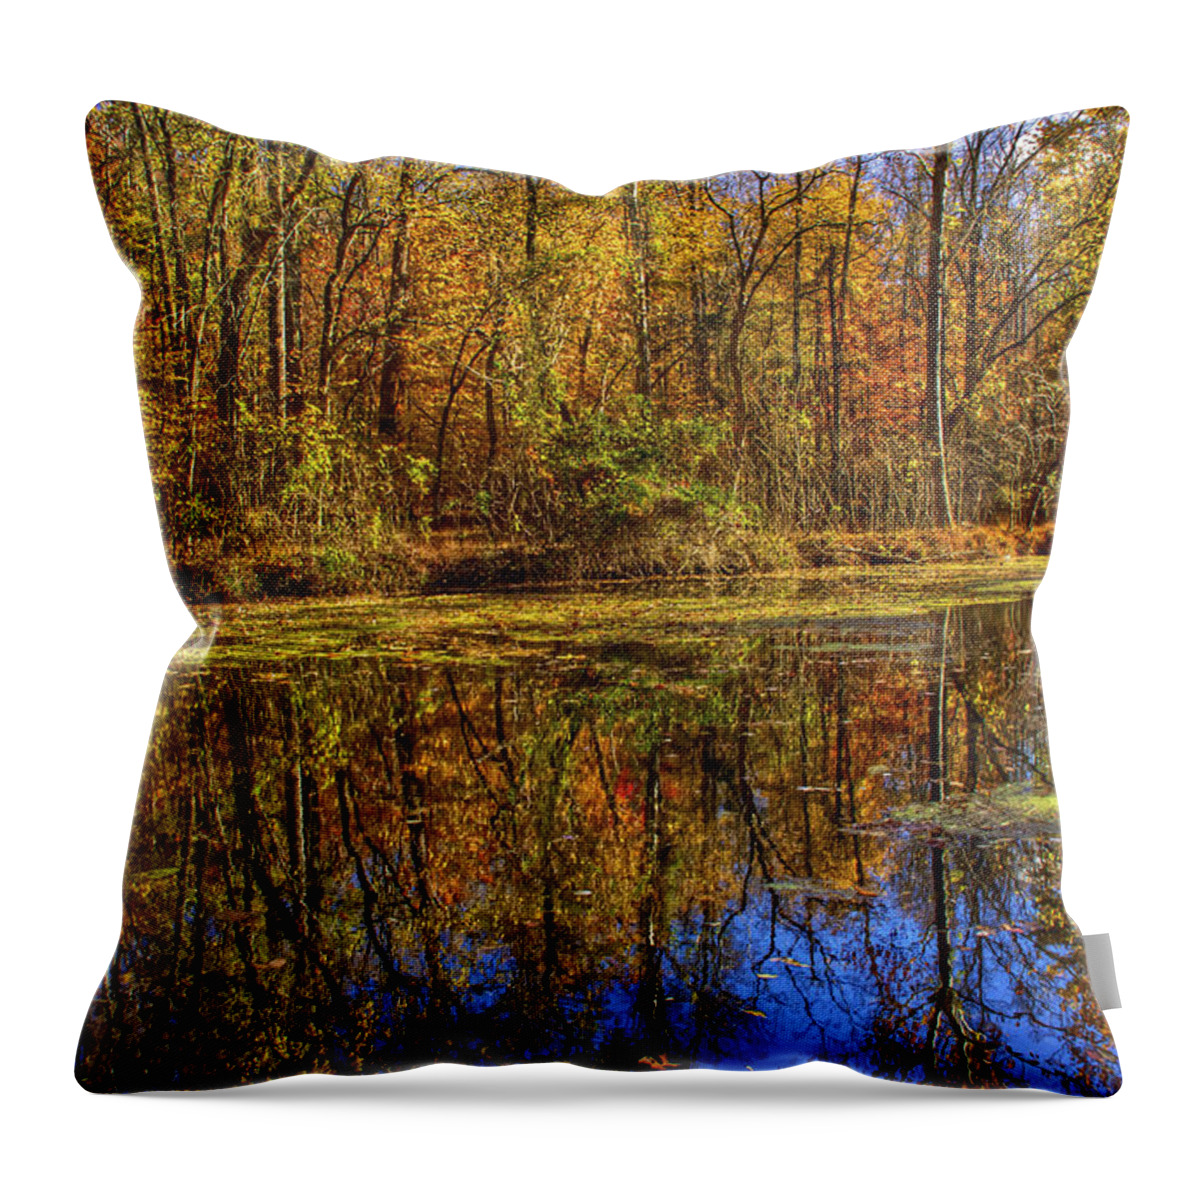 Autumn Throw Pillow featuring the photograph The Vibrancy of Leaves by Kathi Isserman